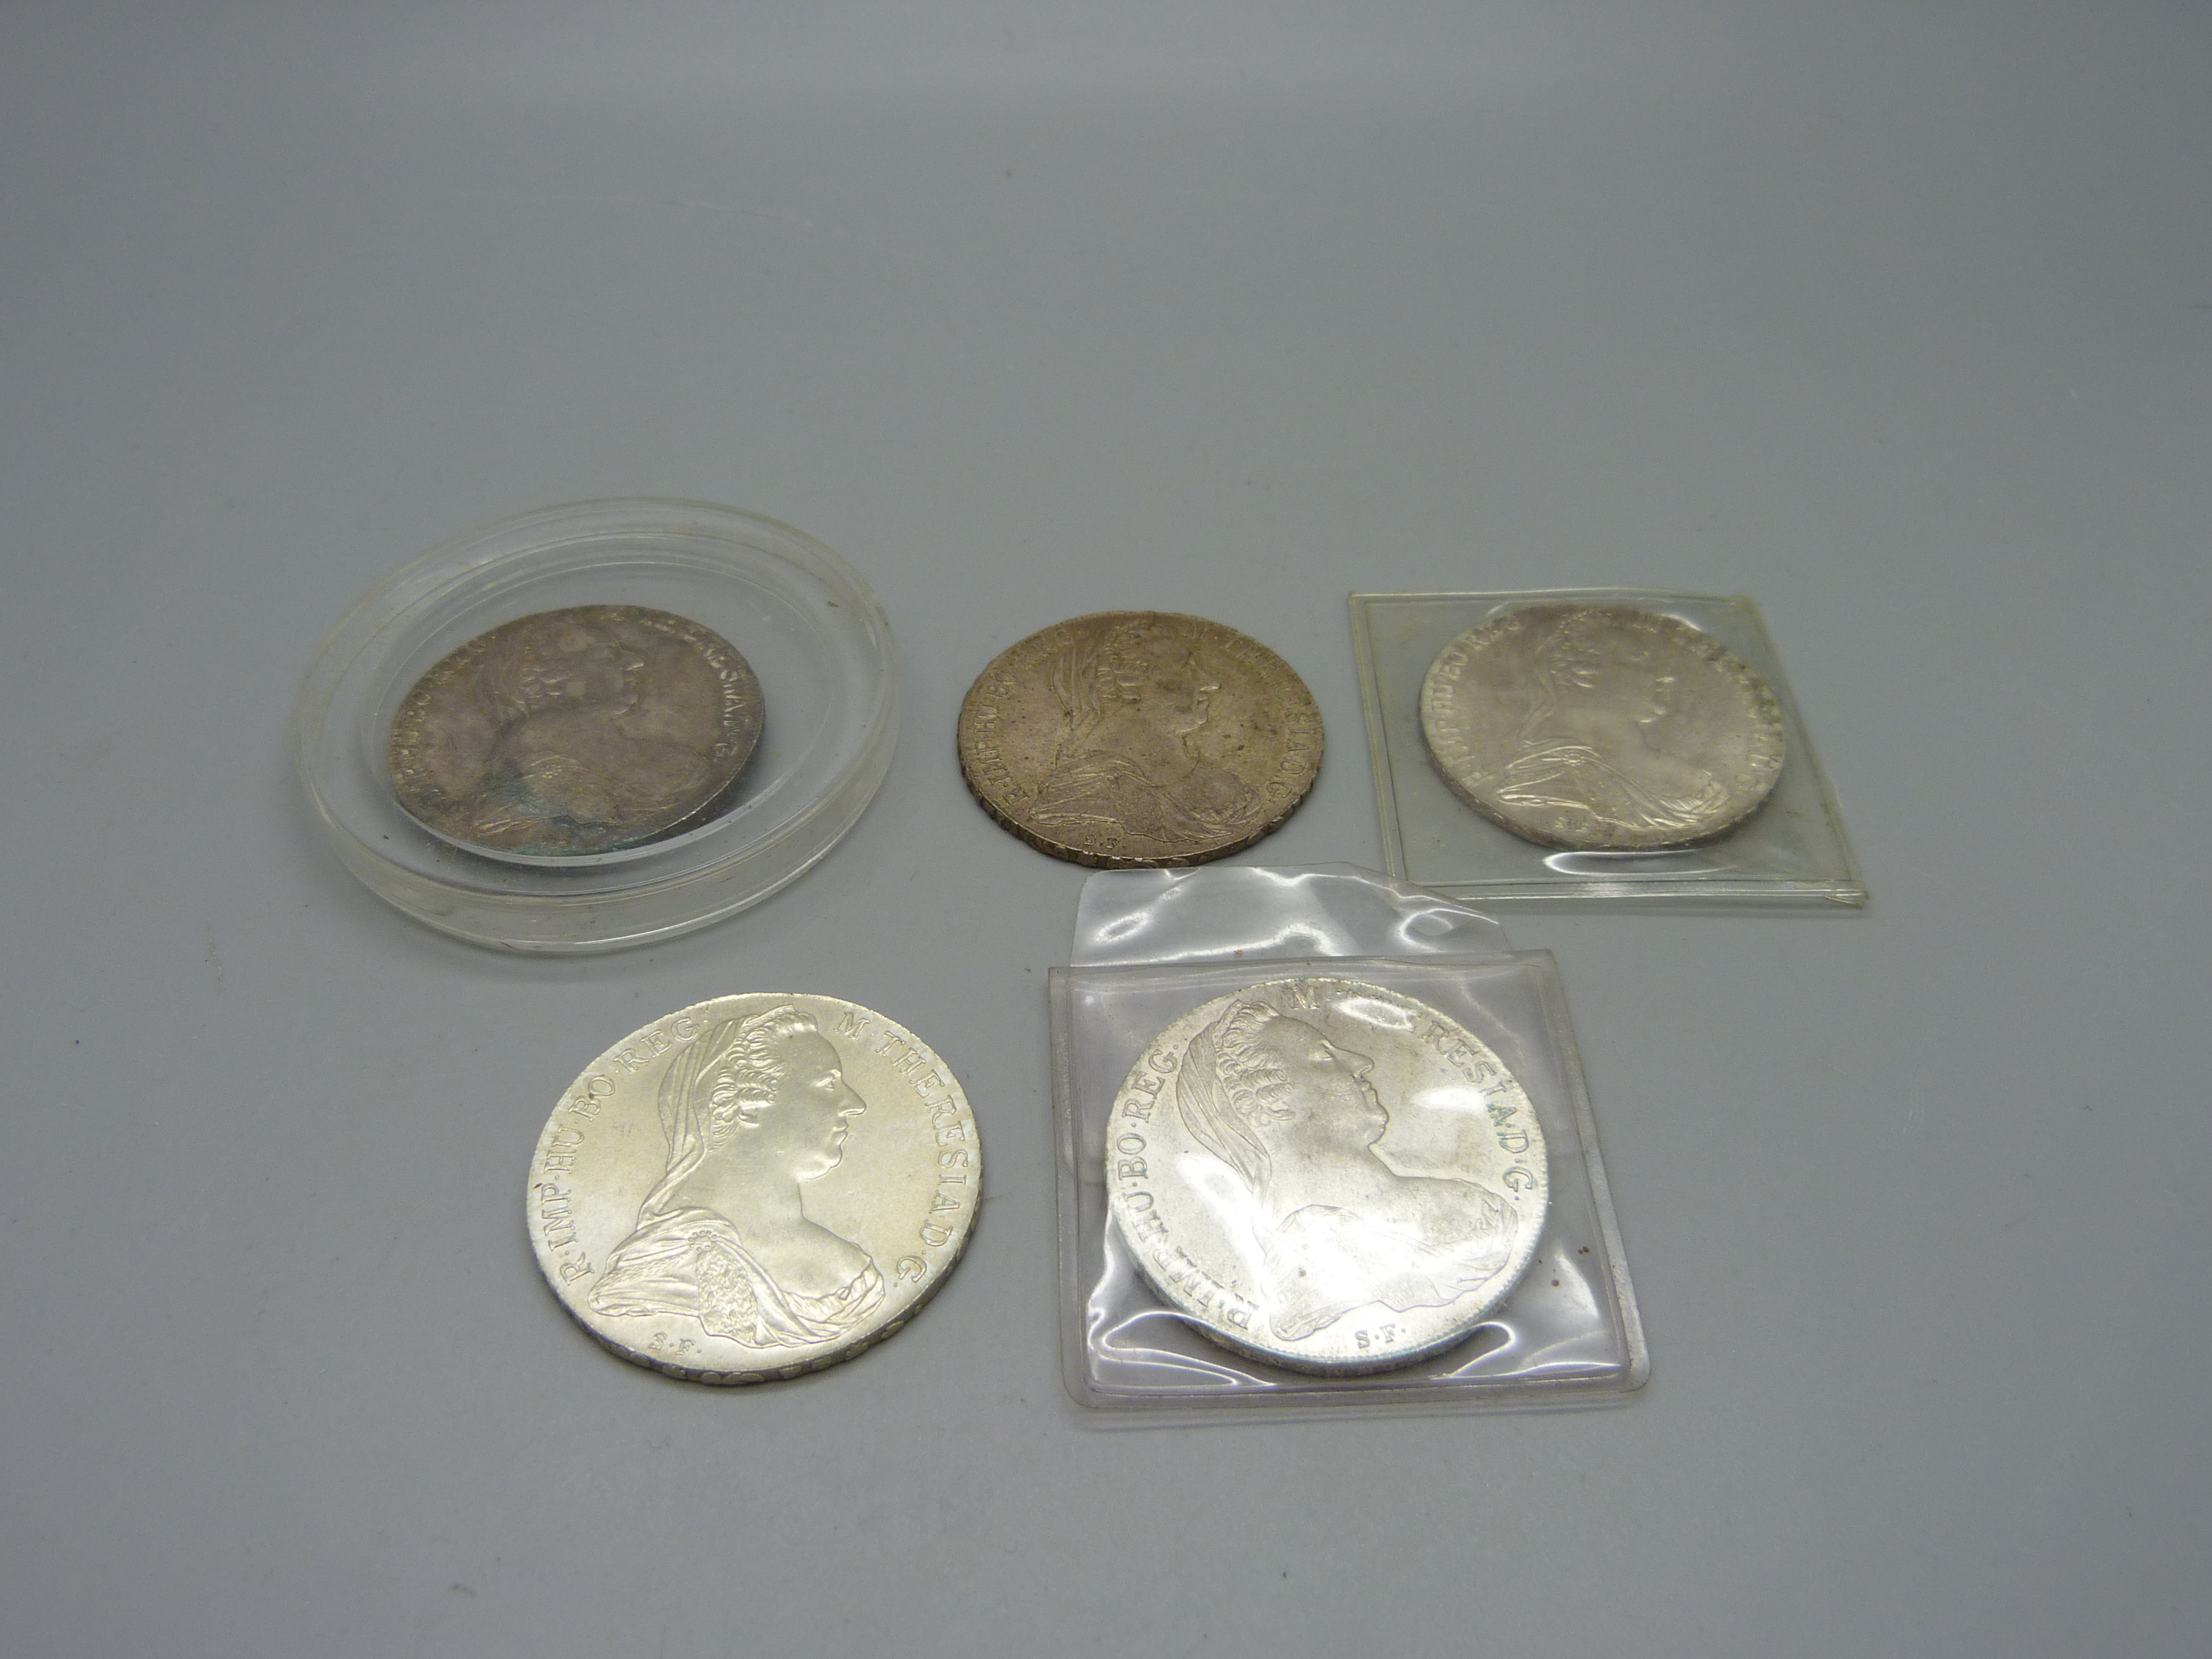 Five silver Marie Theresia coins